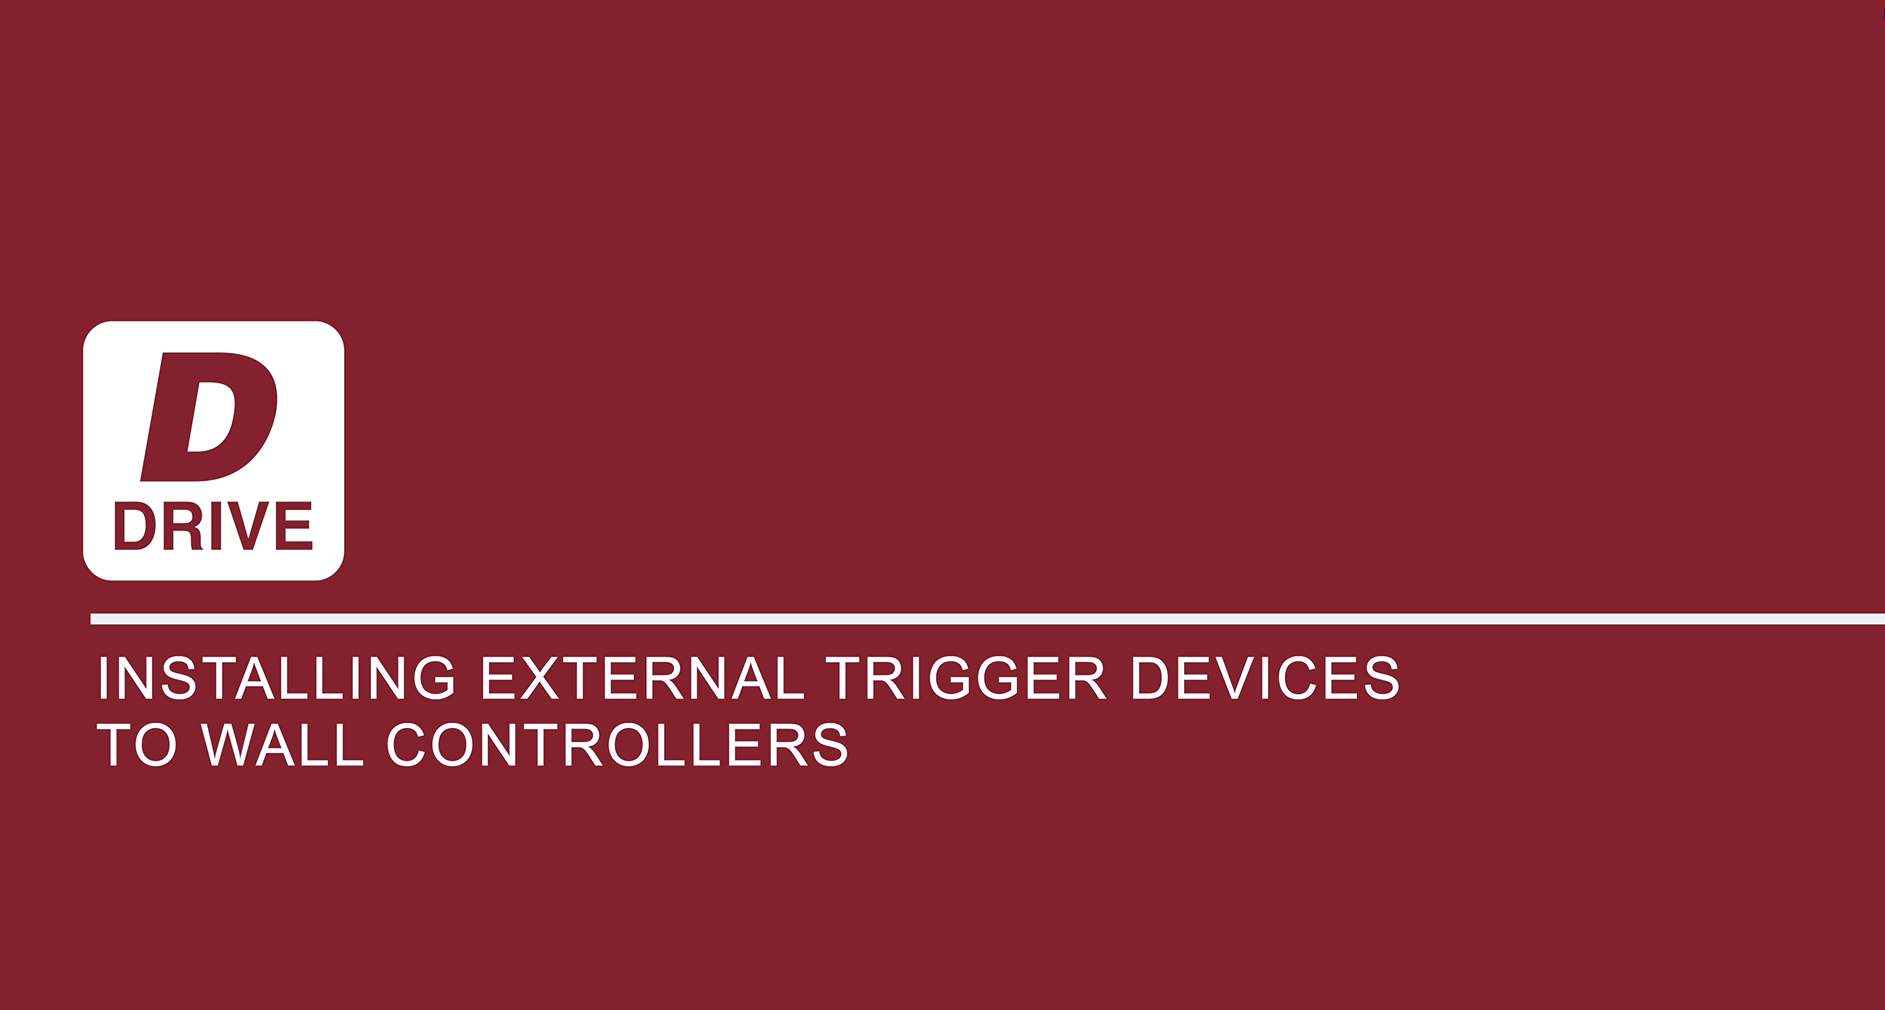 Installing external trigger devices to wall controllers